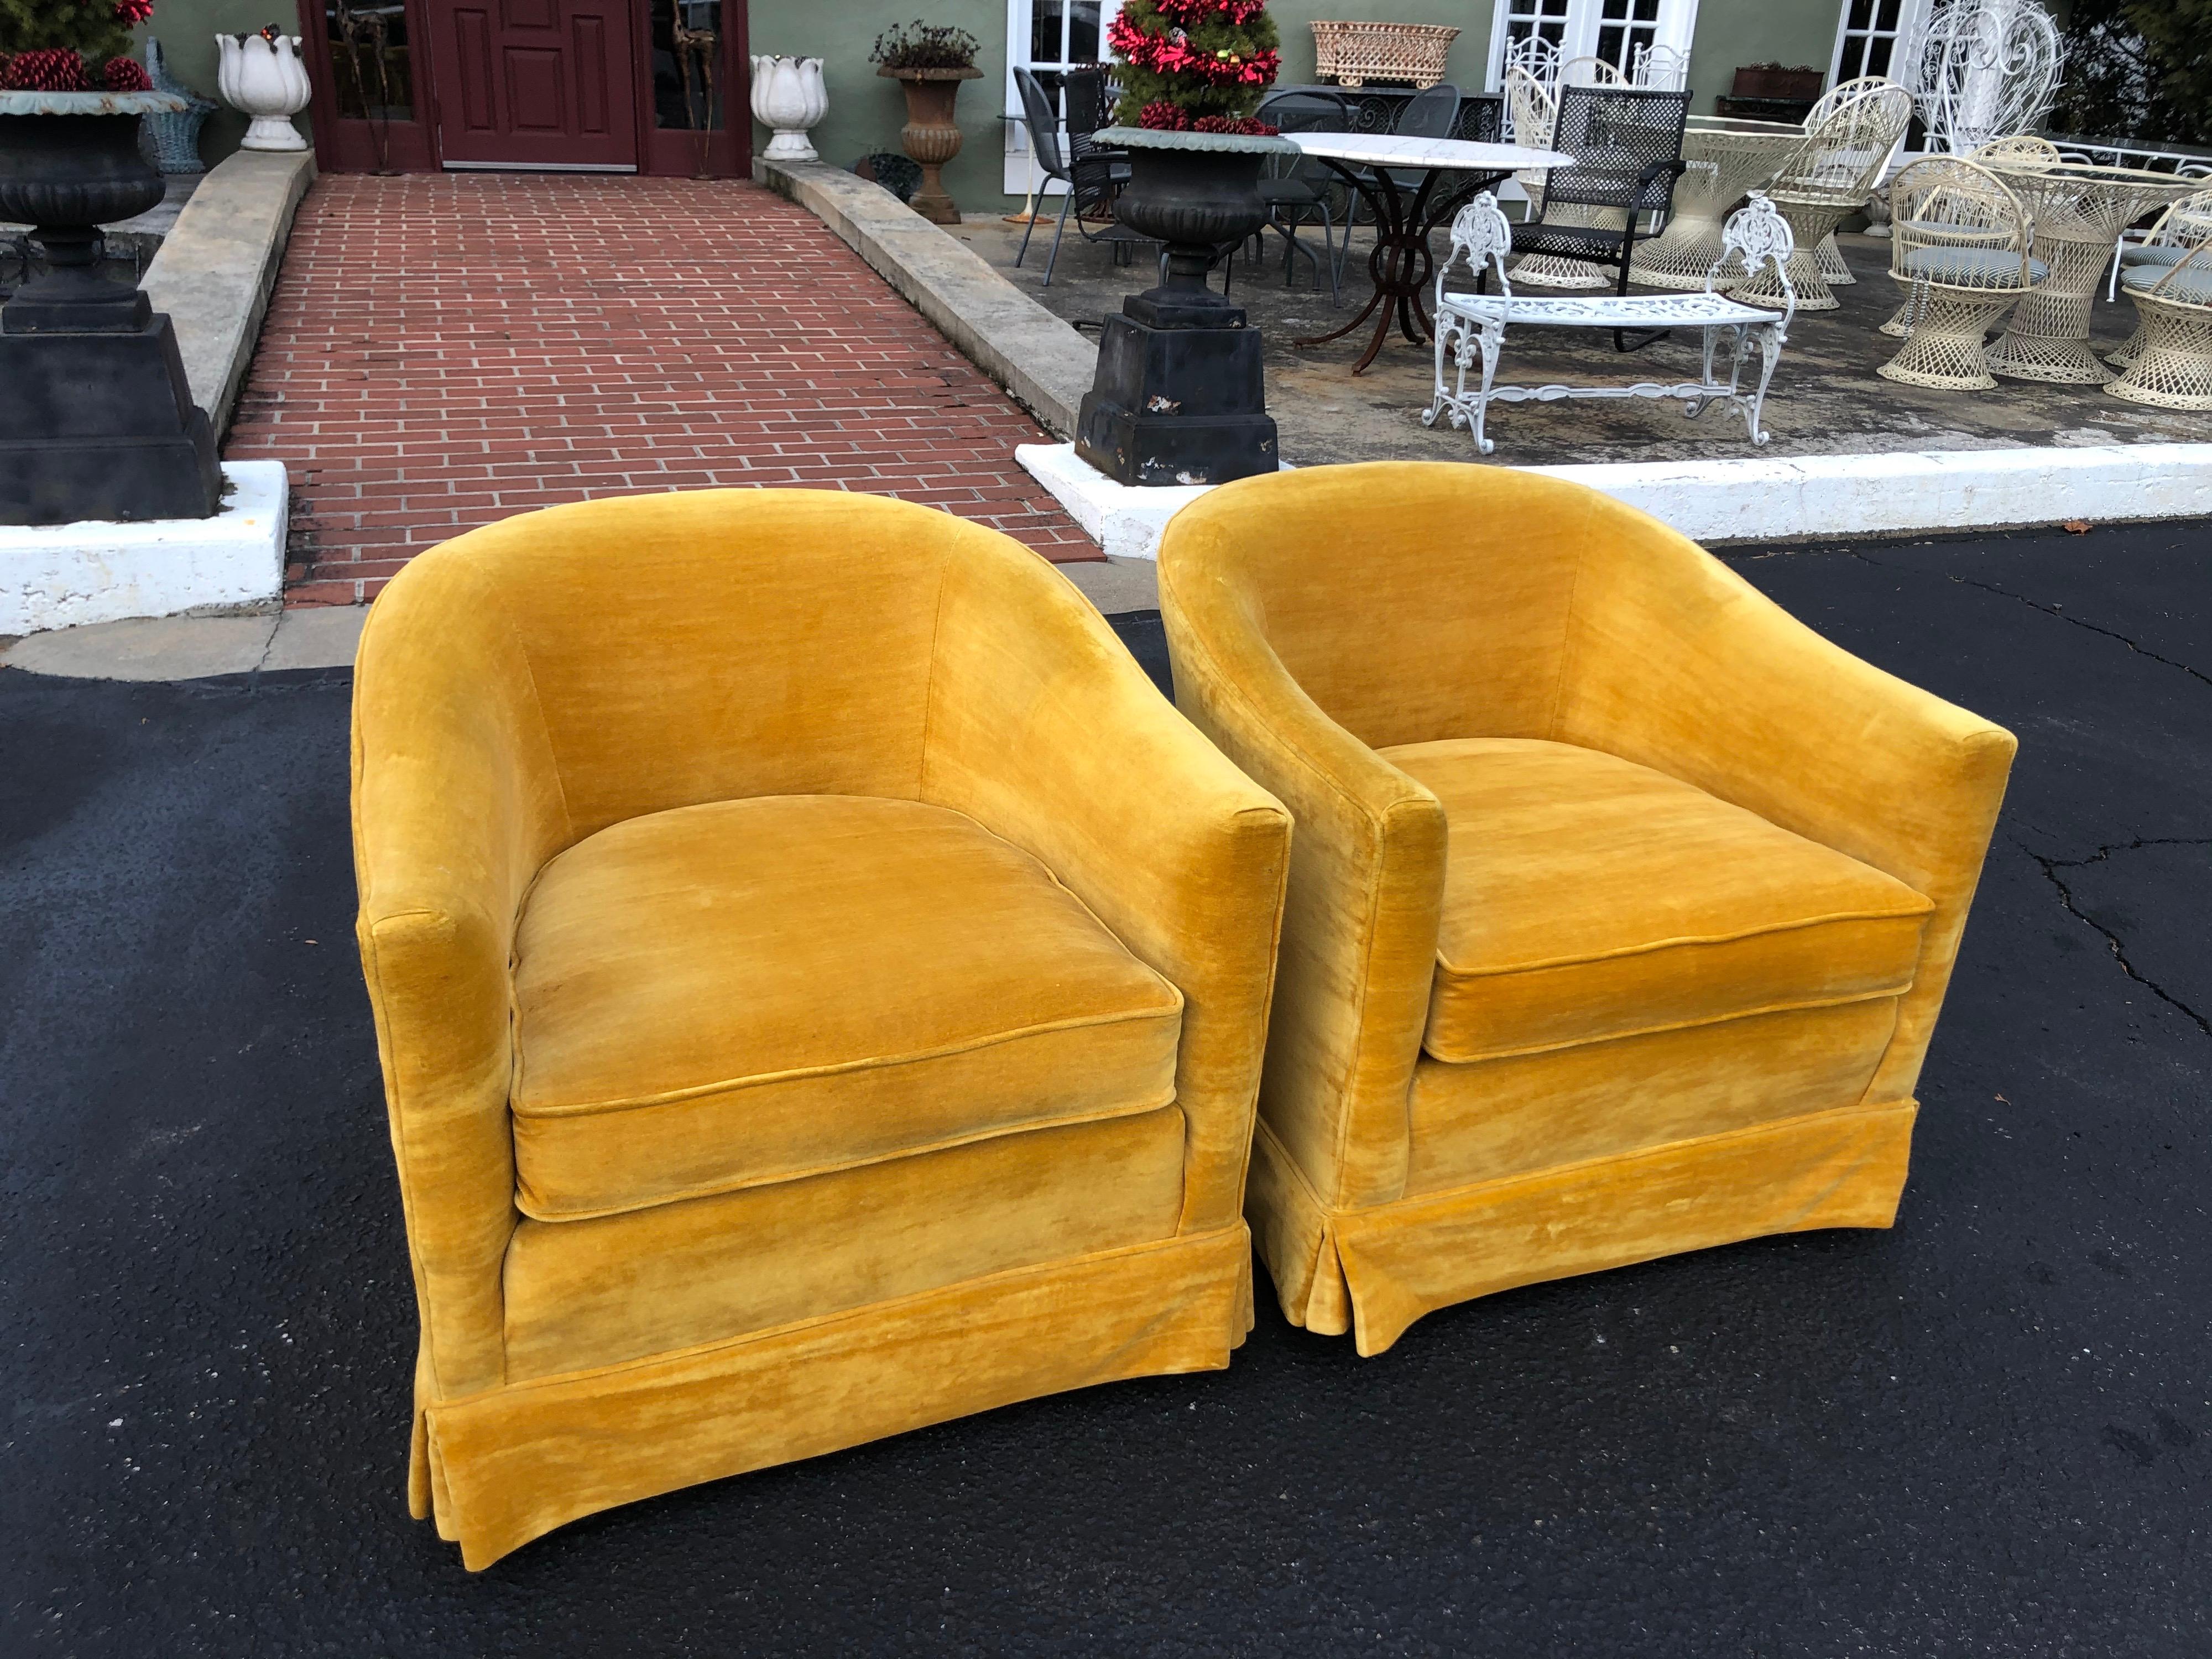 Pair of vintage velvet club chairs in a rich golden mustard yellow. High Hollywood regency glam style.
Plush and cushy these would compliment any loving room or dressing room. Tragically these beauties do not swivel but have four wooden feet. They